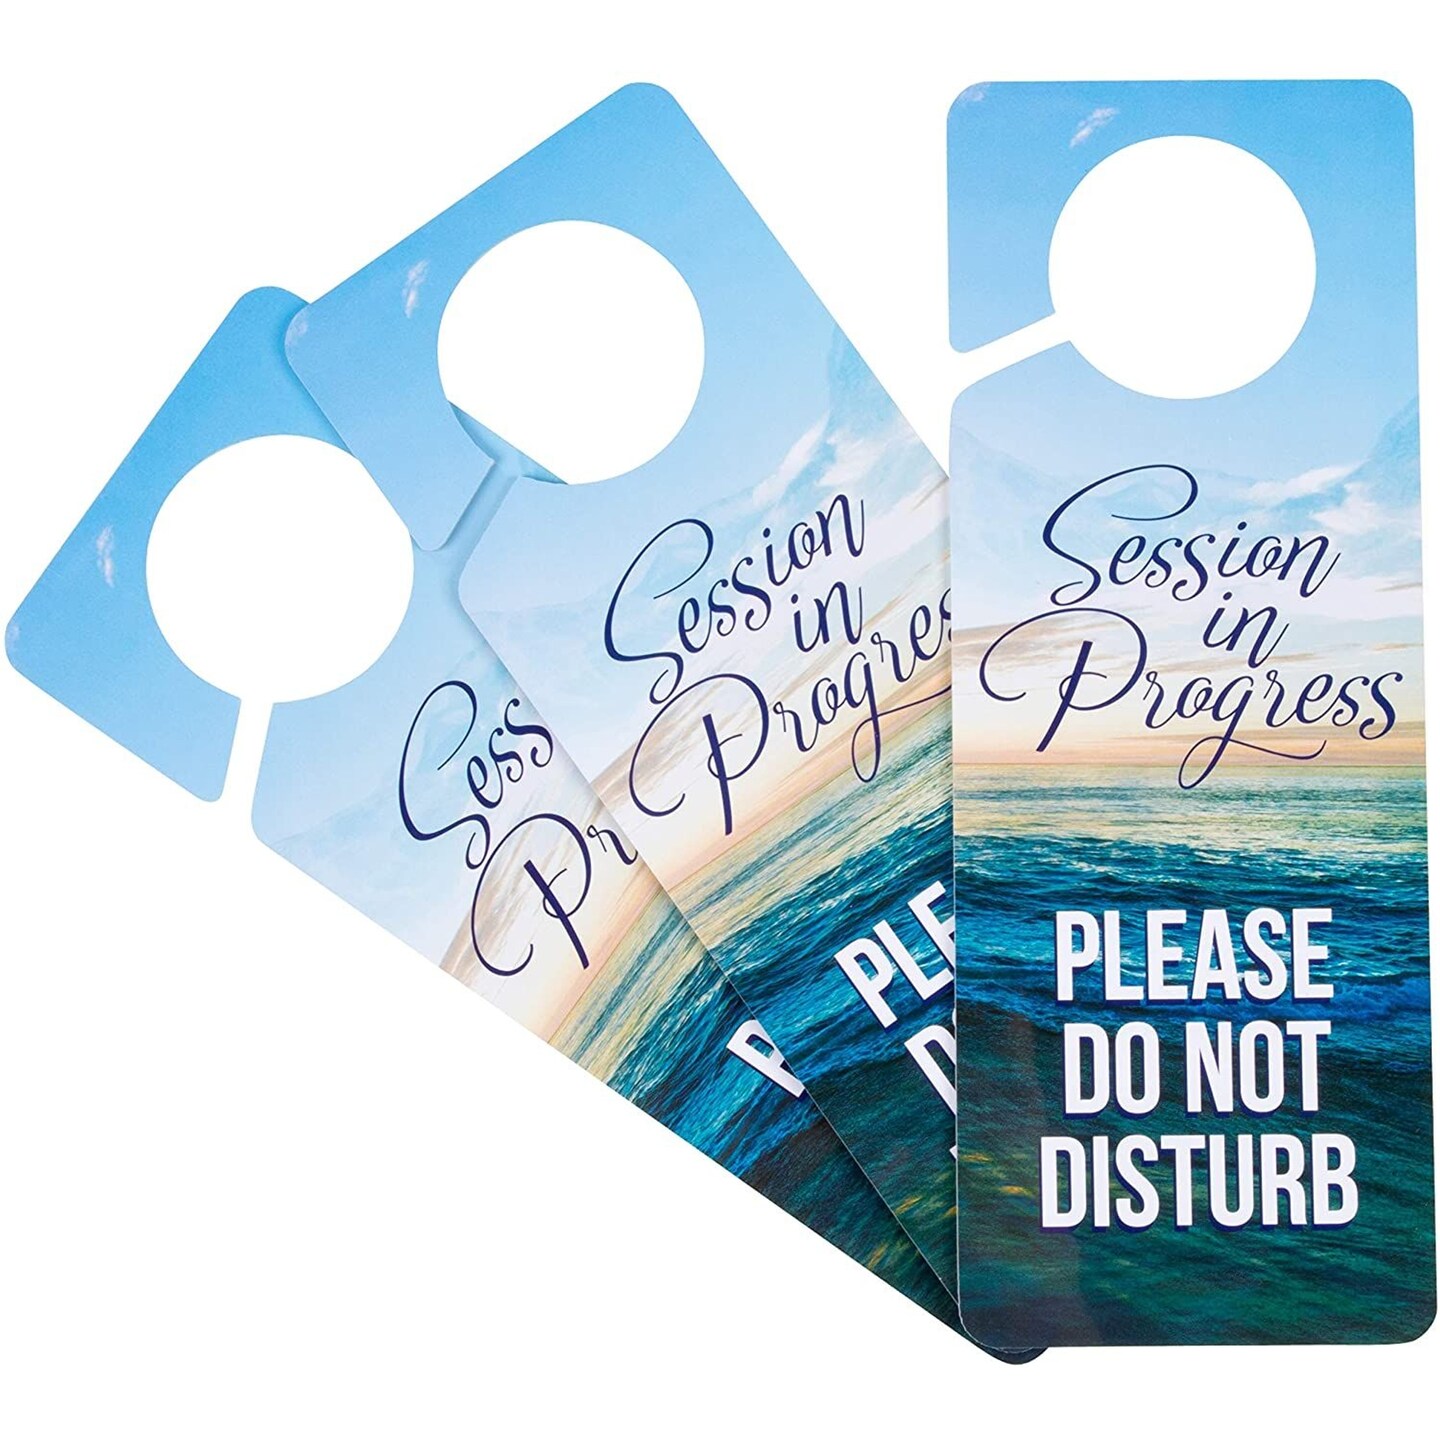 3 Pack Plastic Do Not Disturb Door Hanger Sign for Therapy, Massage Session in Progress, 3.5 x 9.4 Inches